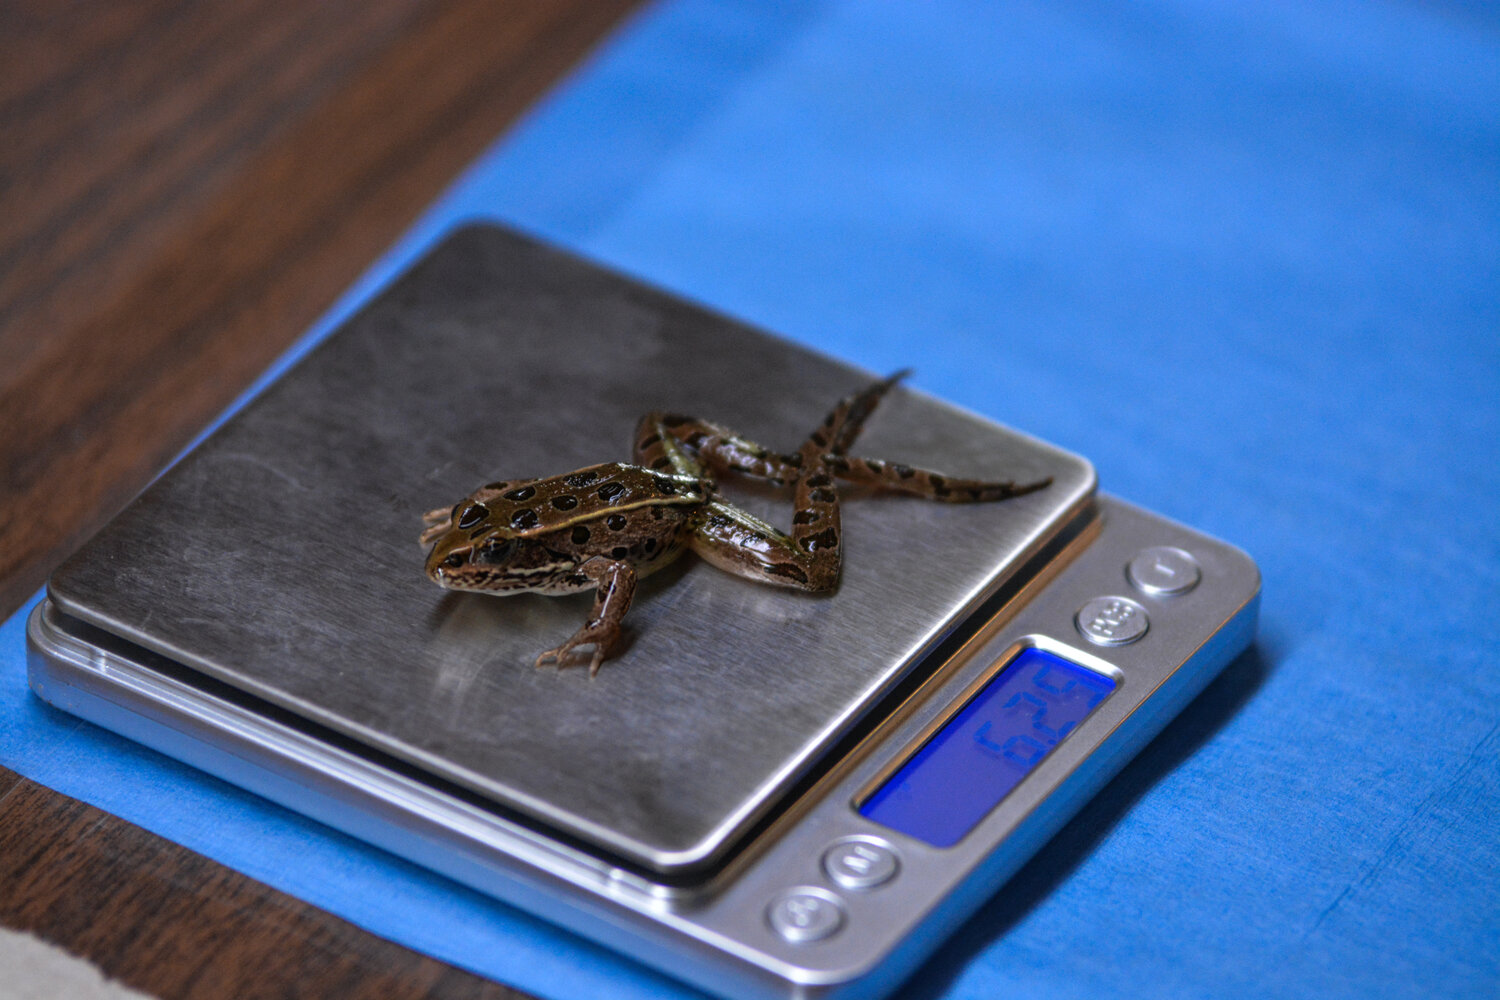 A northern leopard frog comes in at a weight of 6.25 grams while it’s observed at Northwest Trek in Eatonville on Aug. 9.